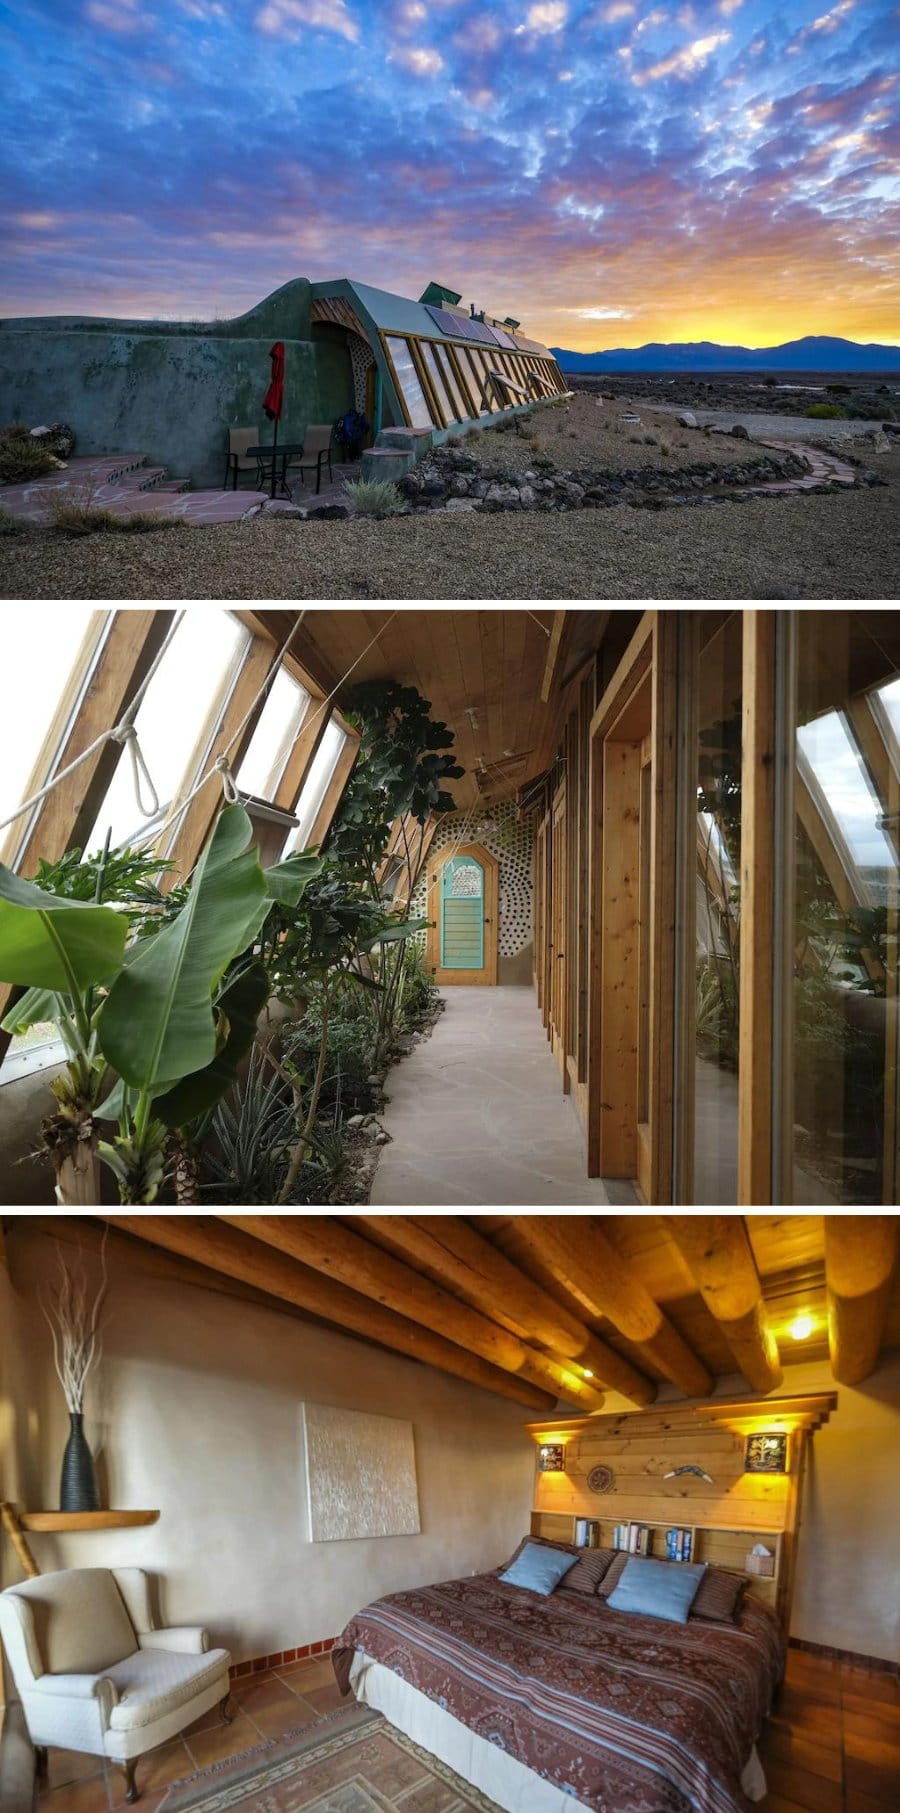 Interior and exterior images of the Earthship in Taos New Mexico Airbnb